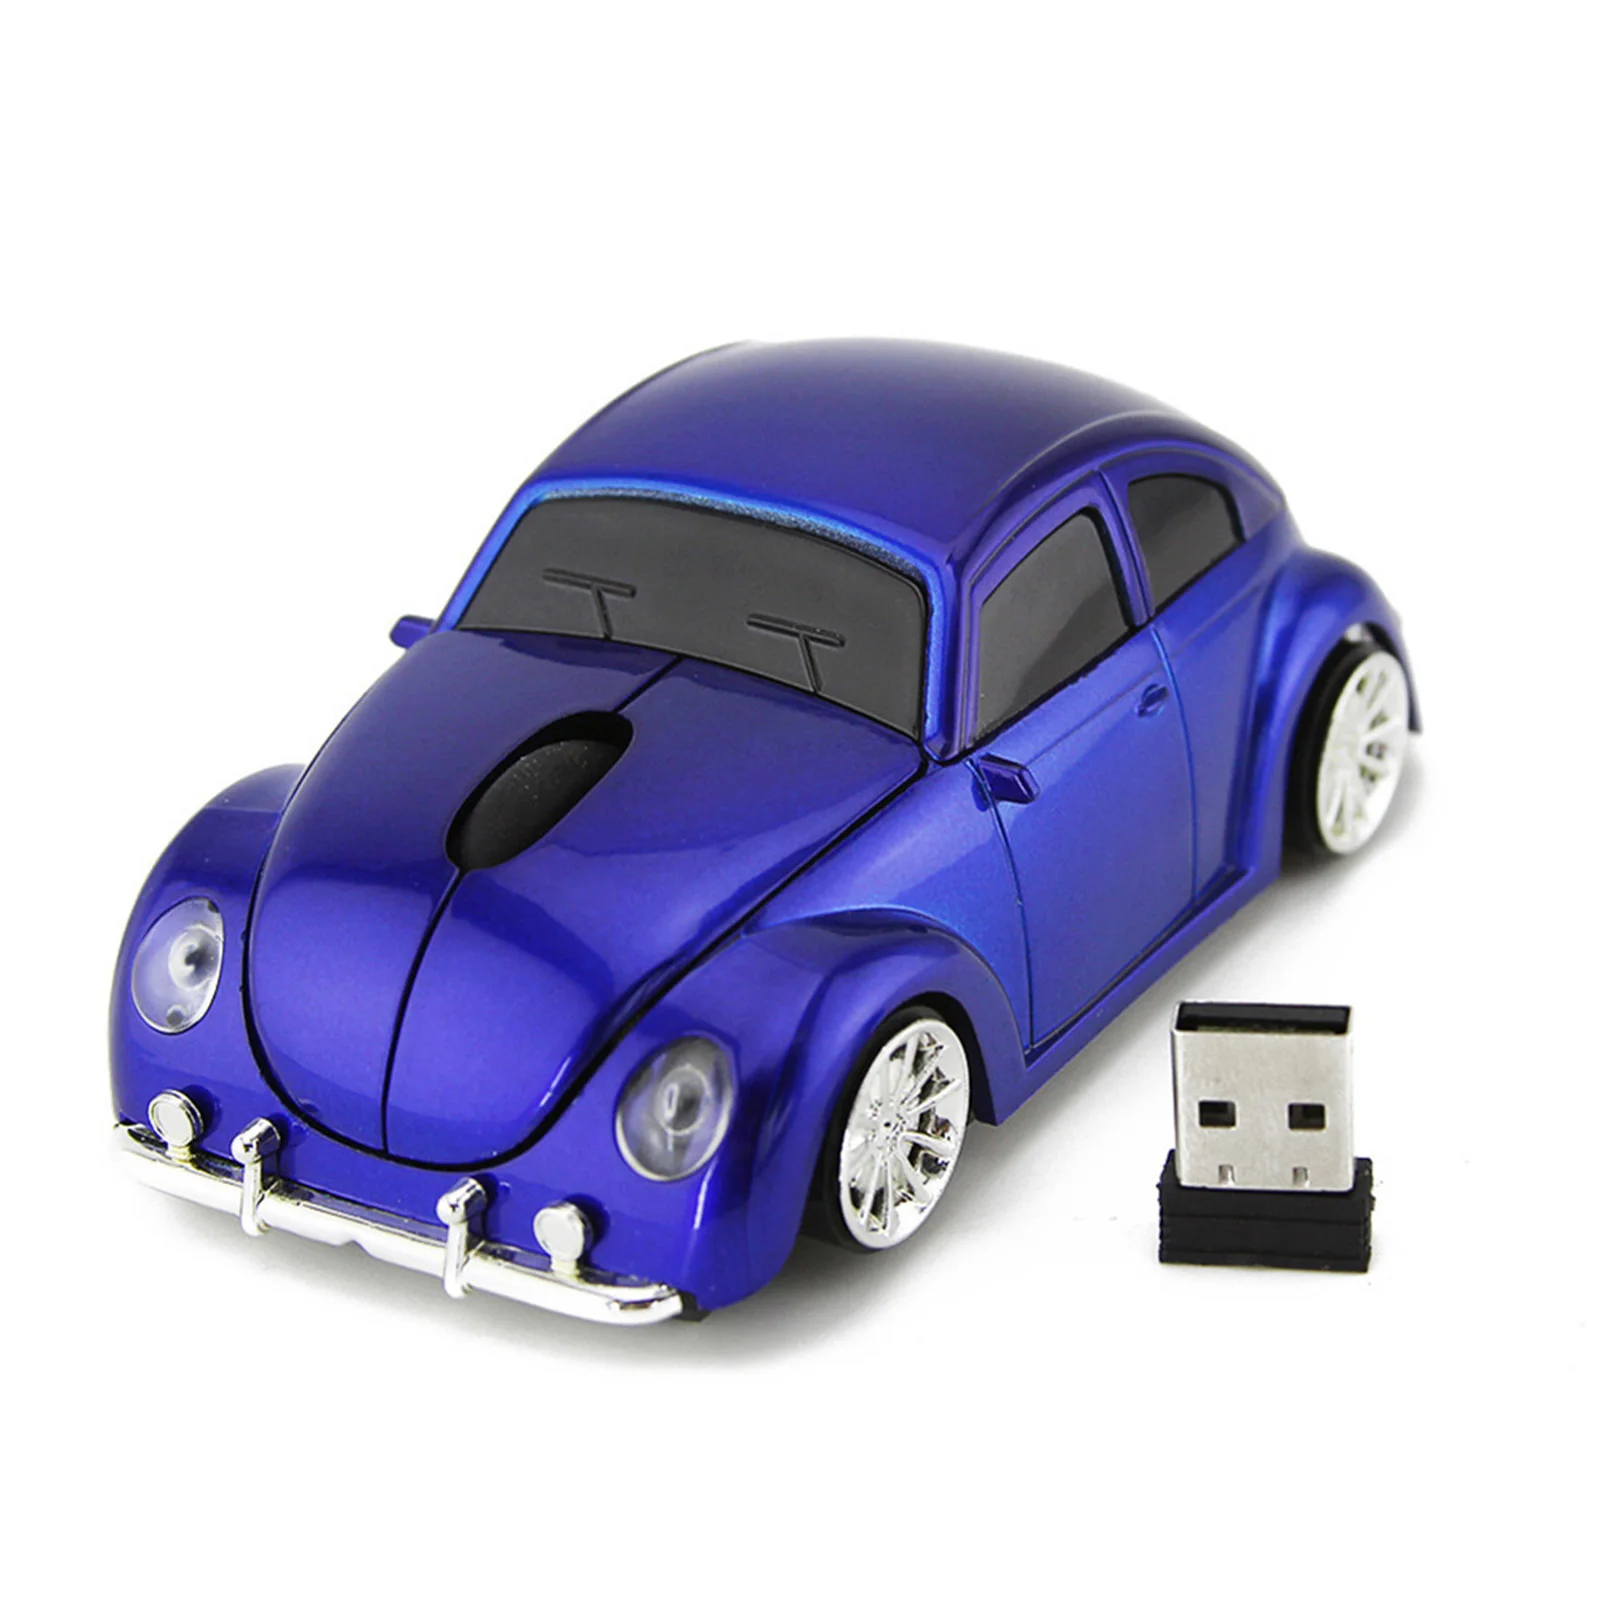 2.4Ghz Mini 1200DPI Wireless Mouse Cute Car Shape with Receiver Wireless Optical Mouse USB Scroll Mice for Tablet Laptop Compute computer mouse gaming